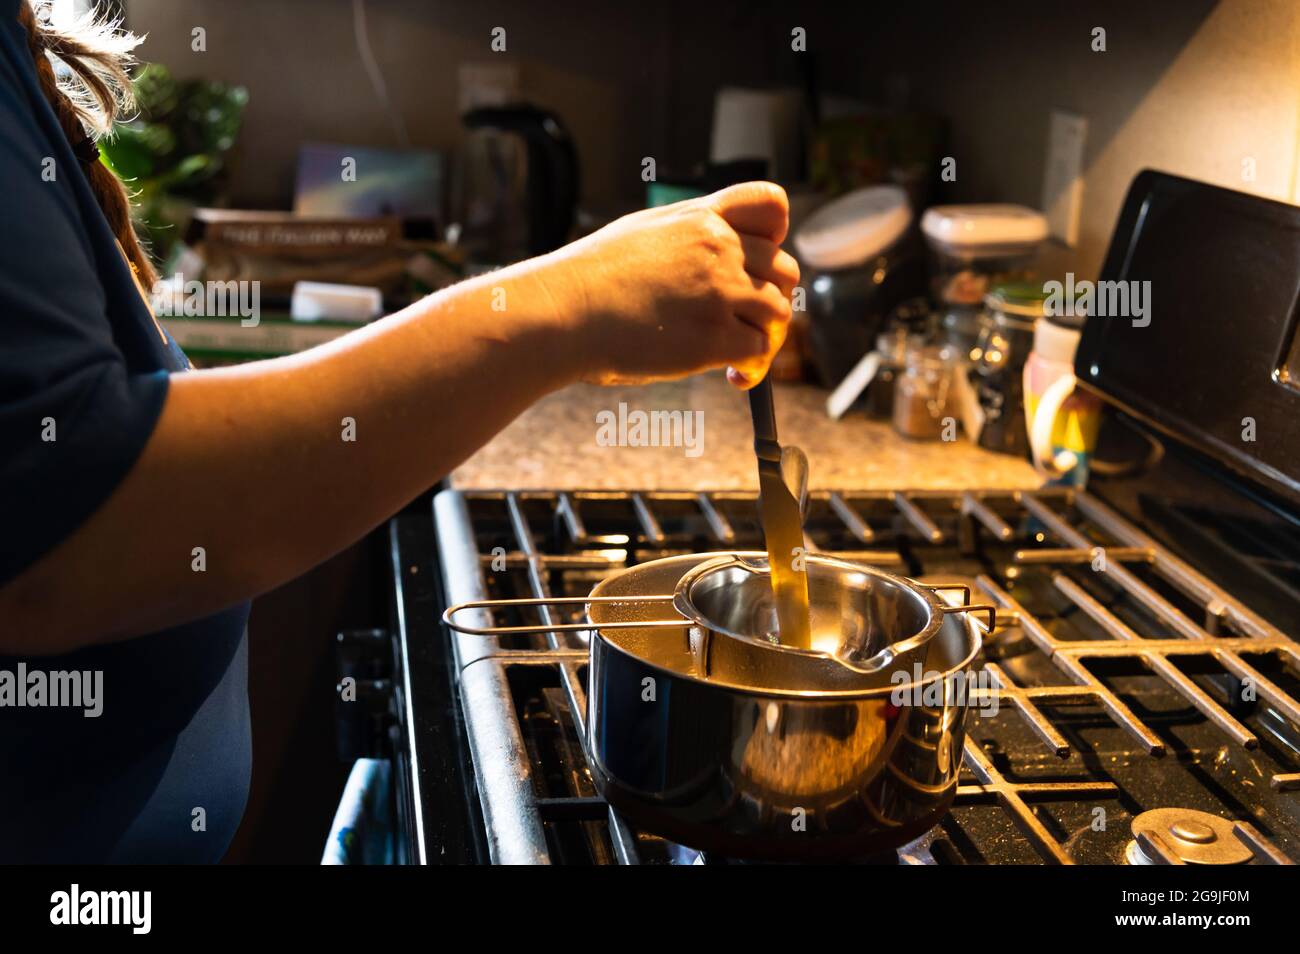 Woman Stirring Double Boiler Contents Stock Photo